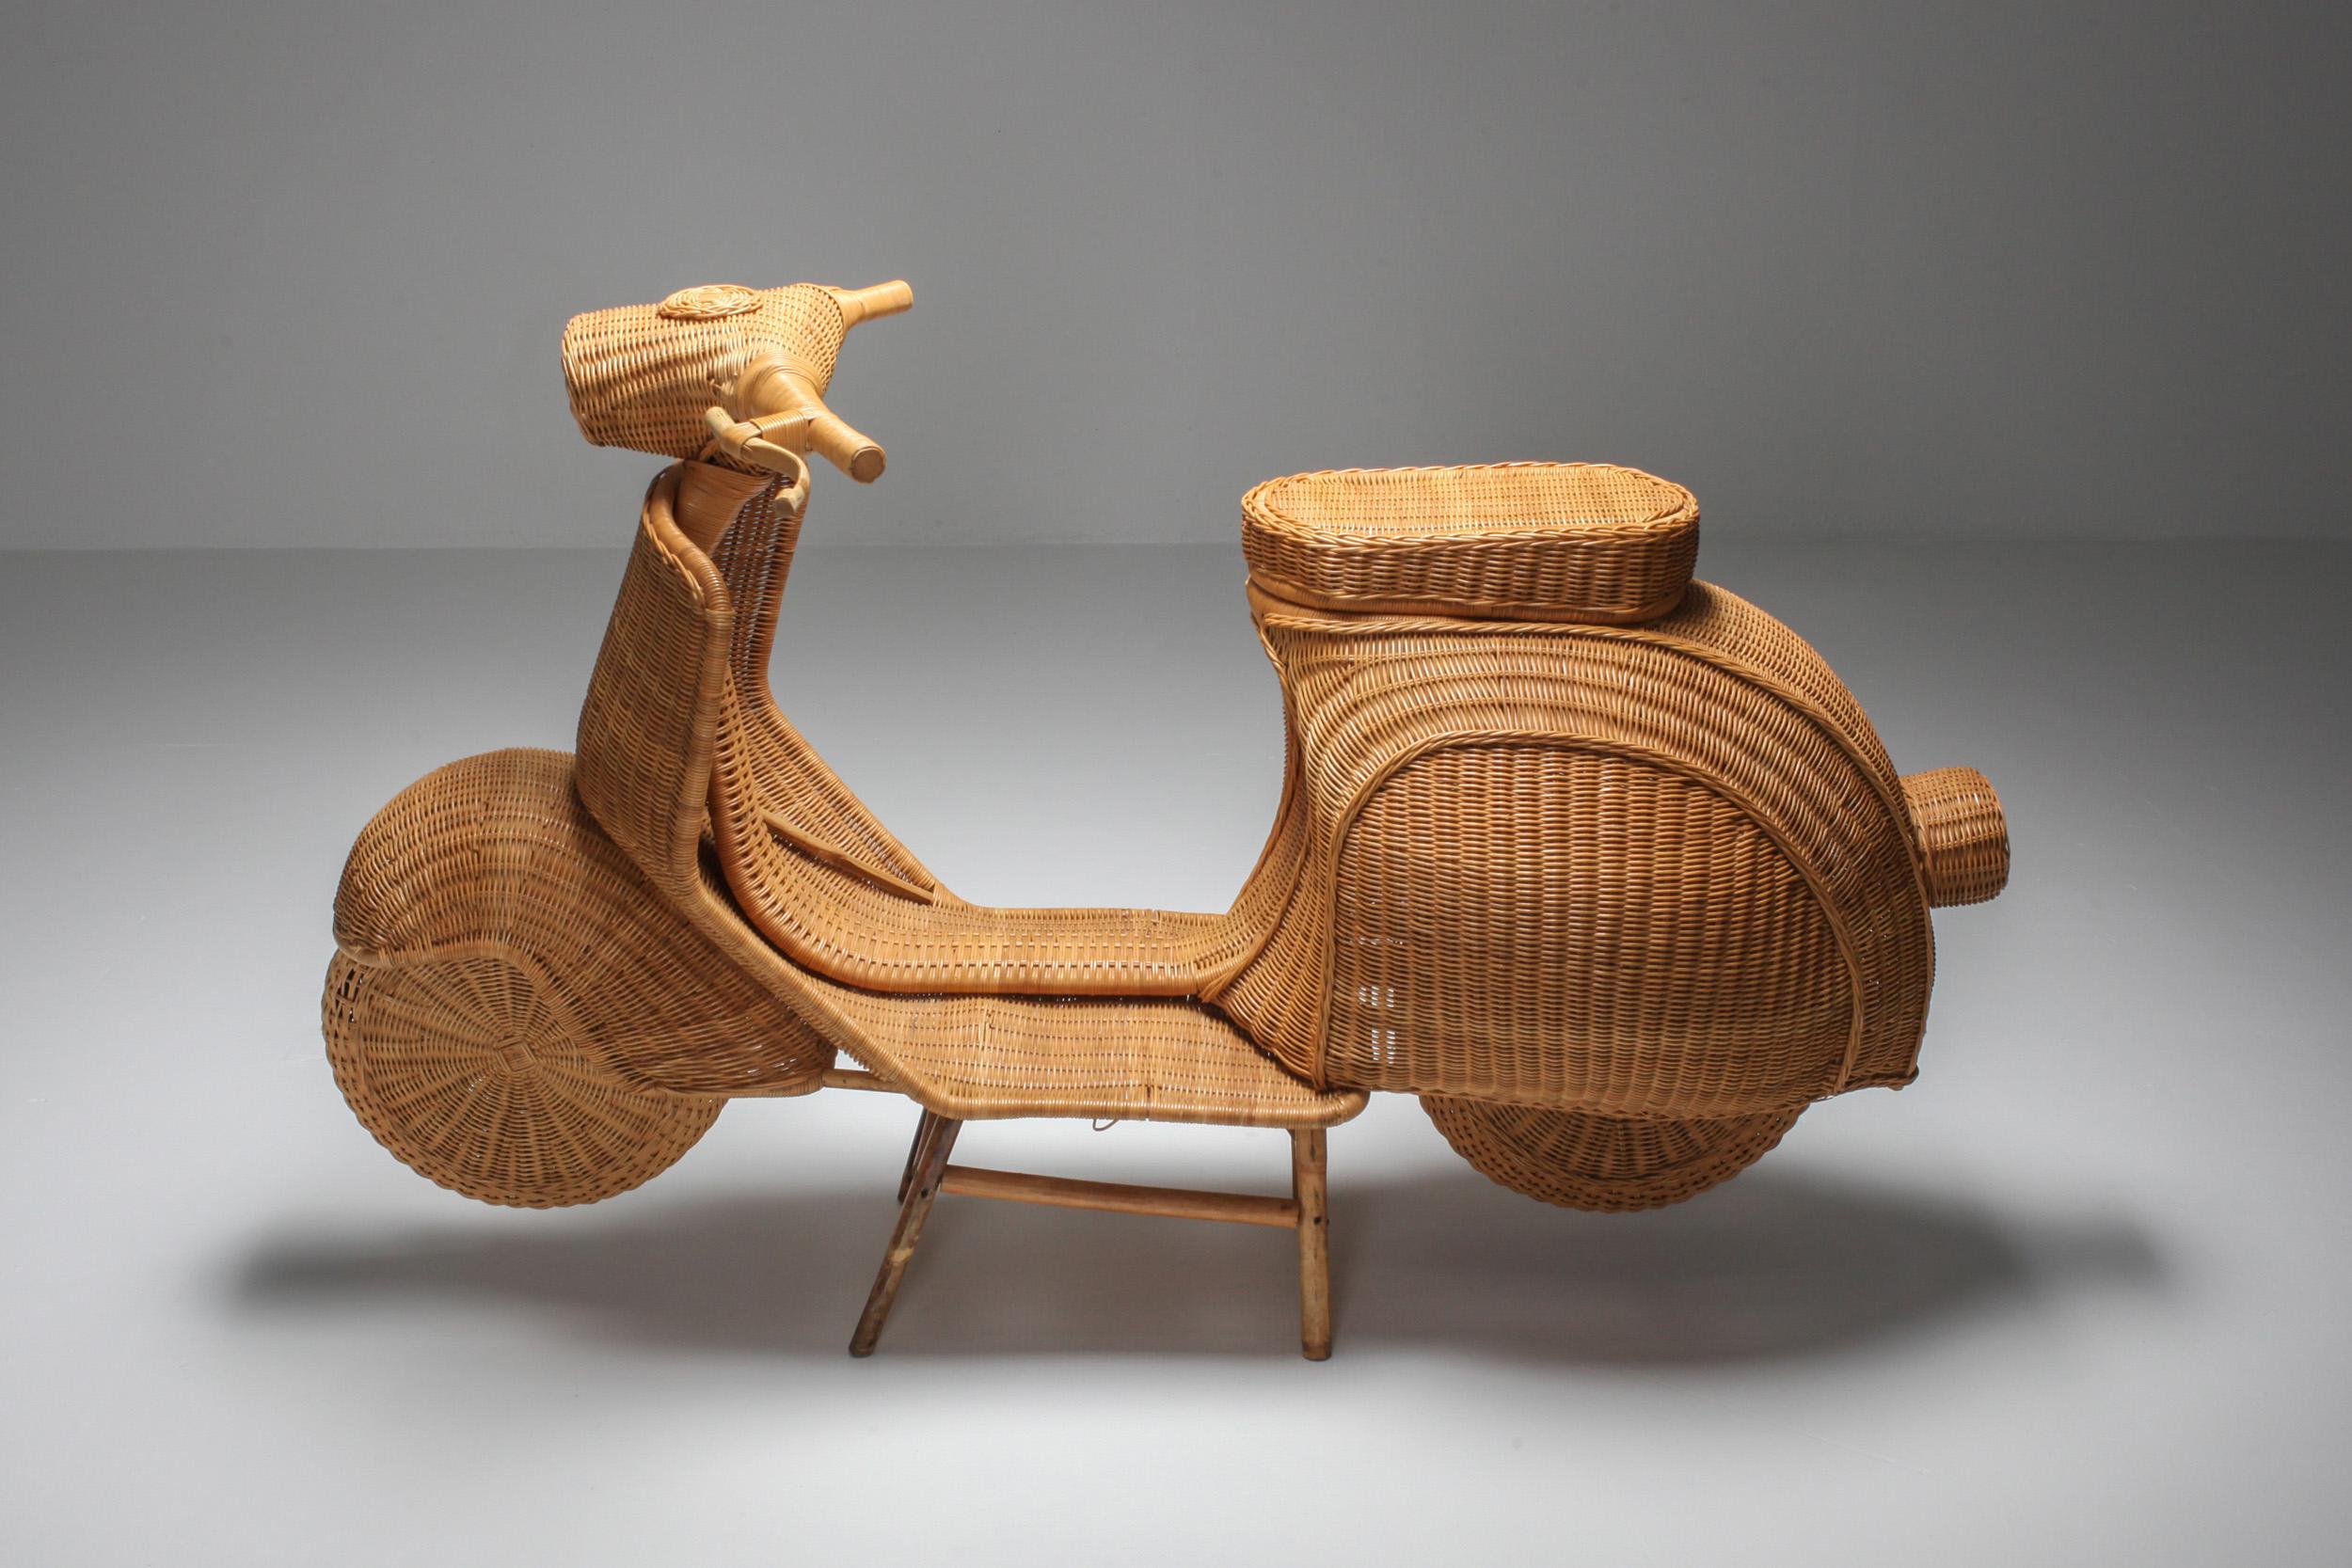 Life size sculpture in wicker and bamboo, Italy, 1970s

The iconic Vespa scooter as a wicker sculpture.
How much fun is that!
Probably made on demand by a great company like Vivai del Sud.
 